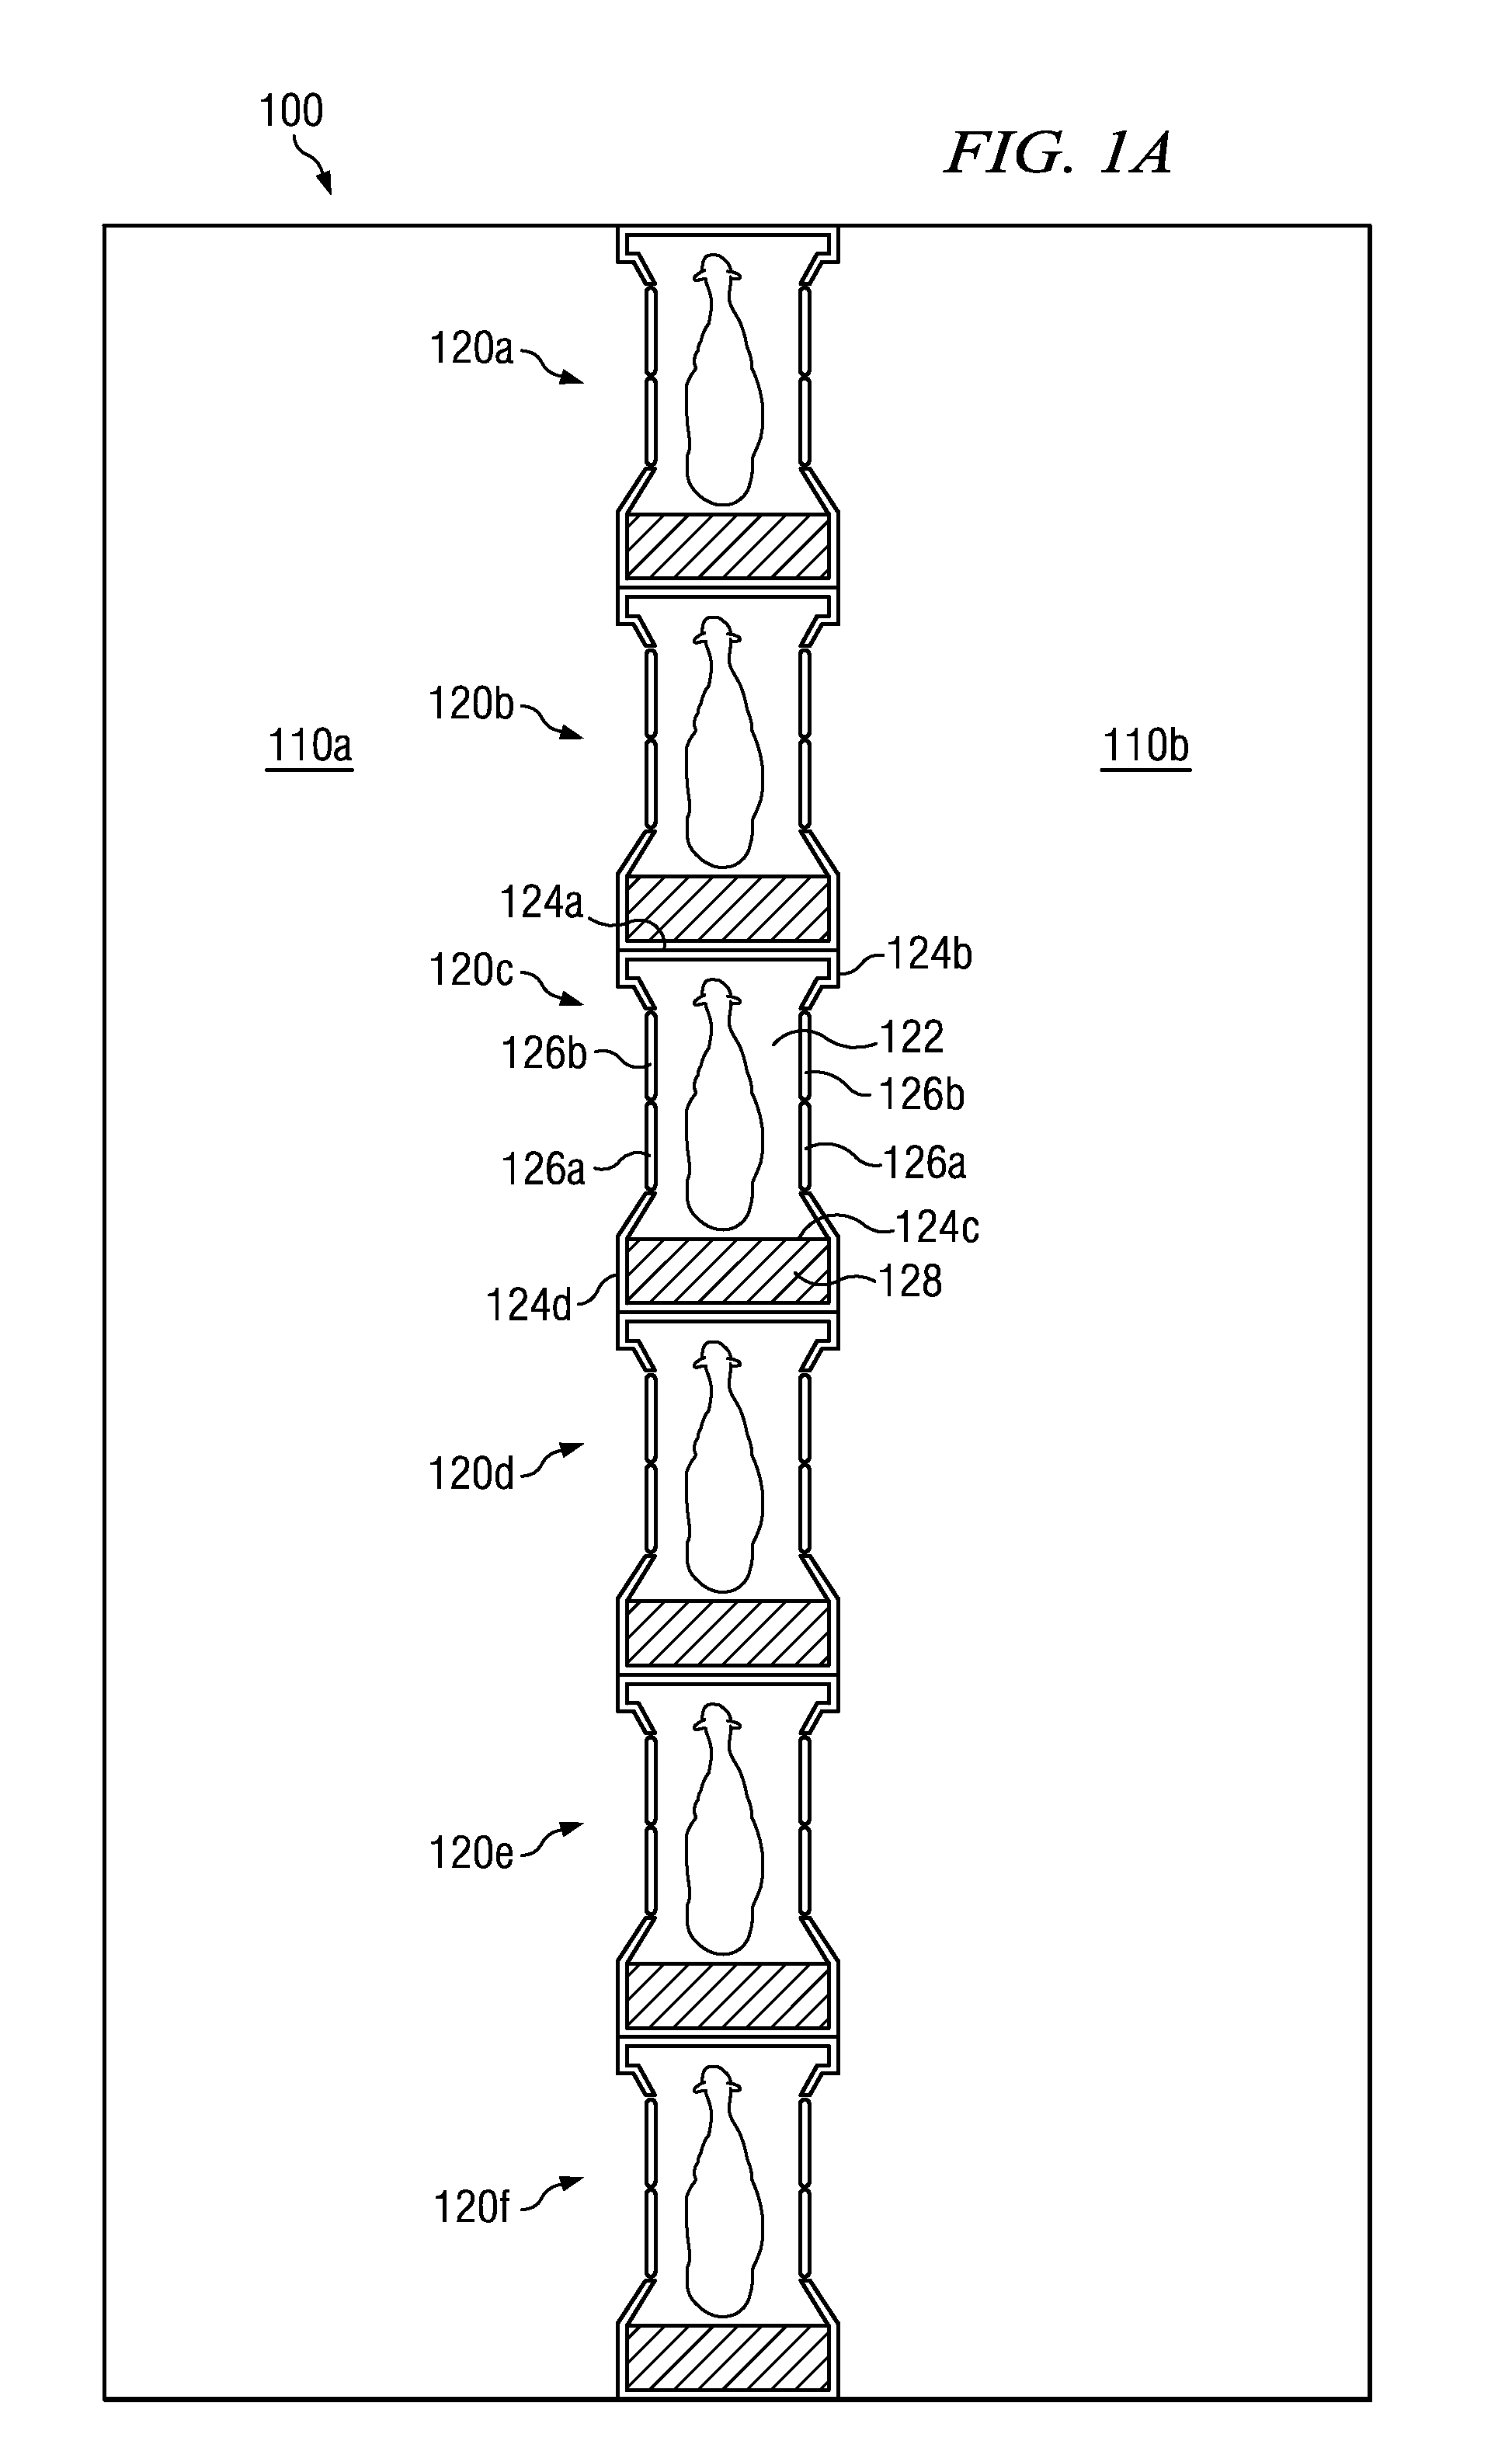 System and Method for Analyzing Data Captured by a Three-Dimensional Camera